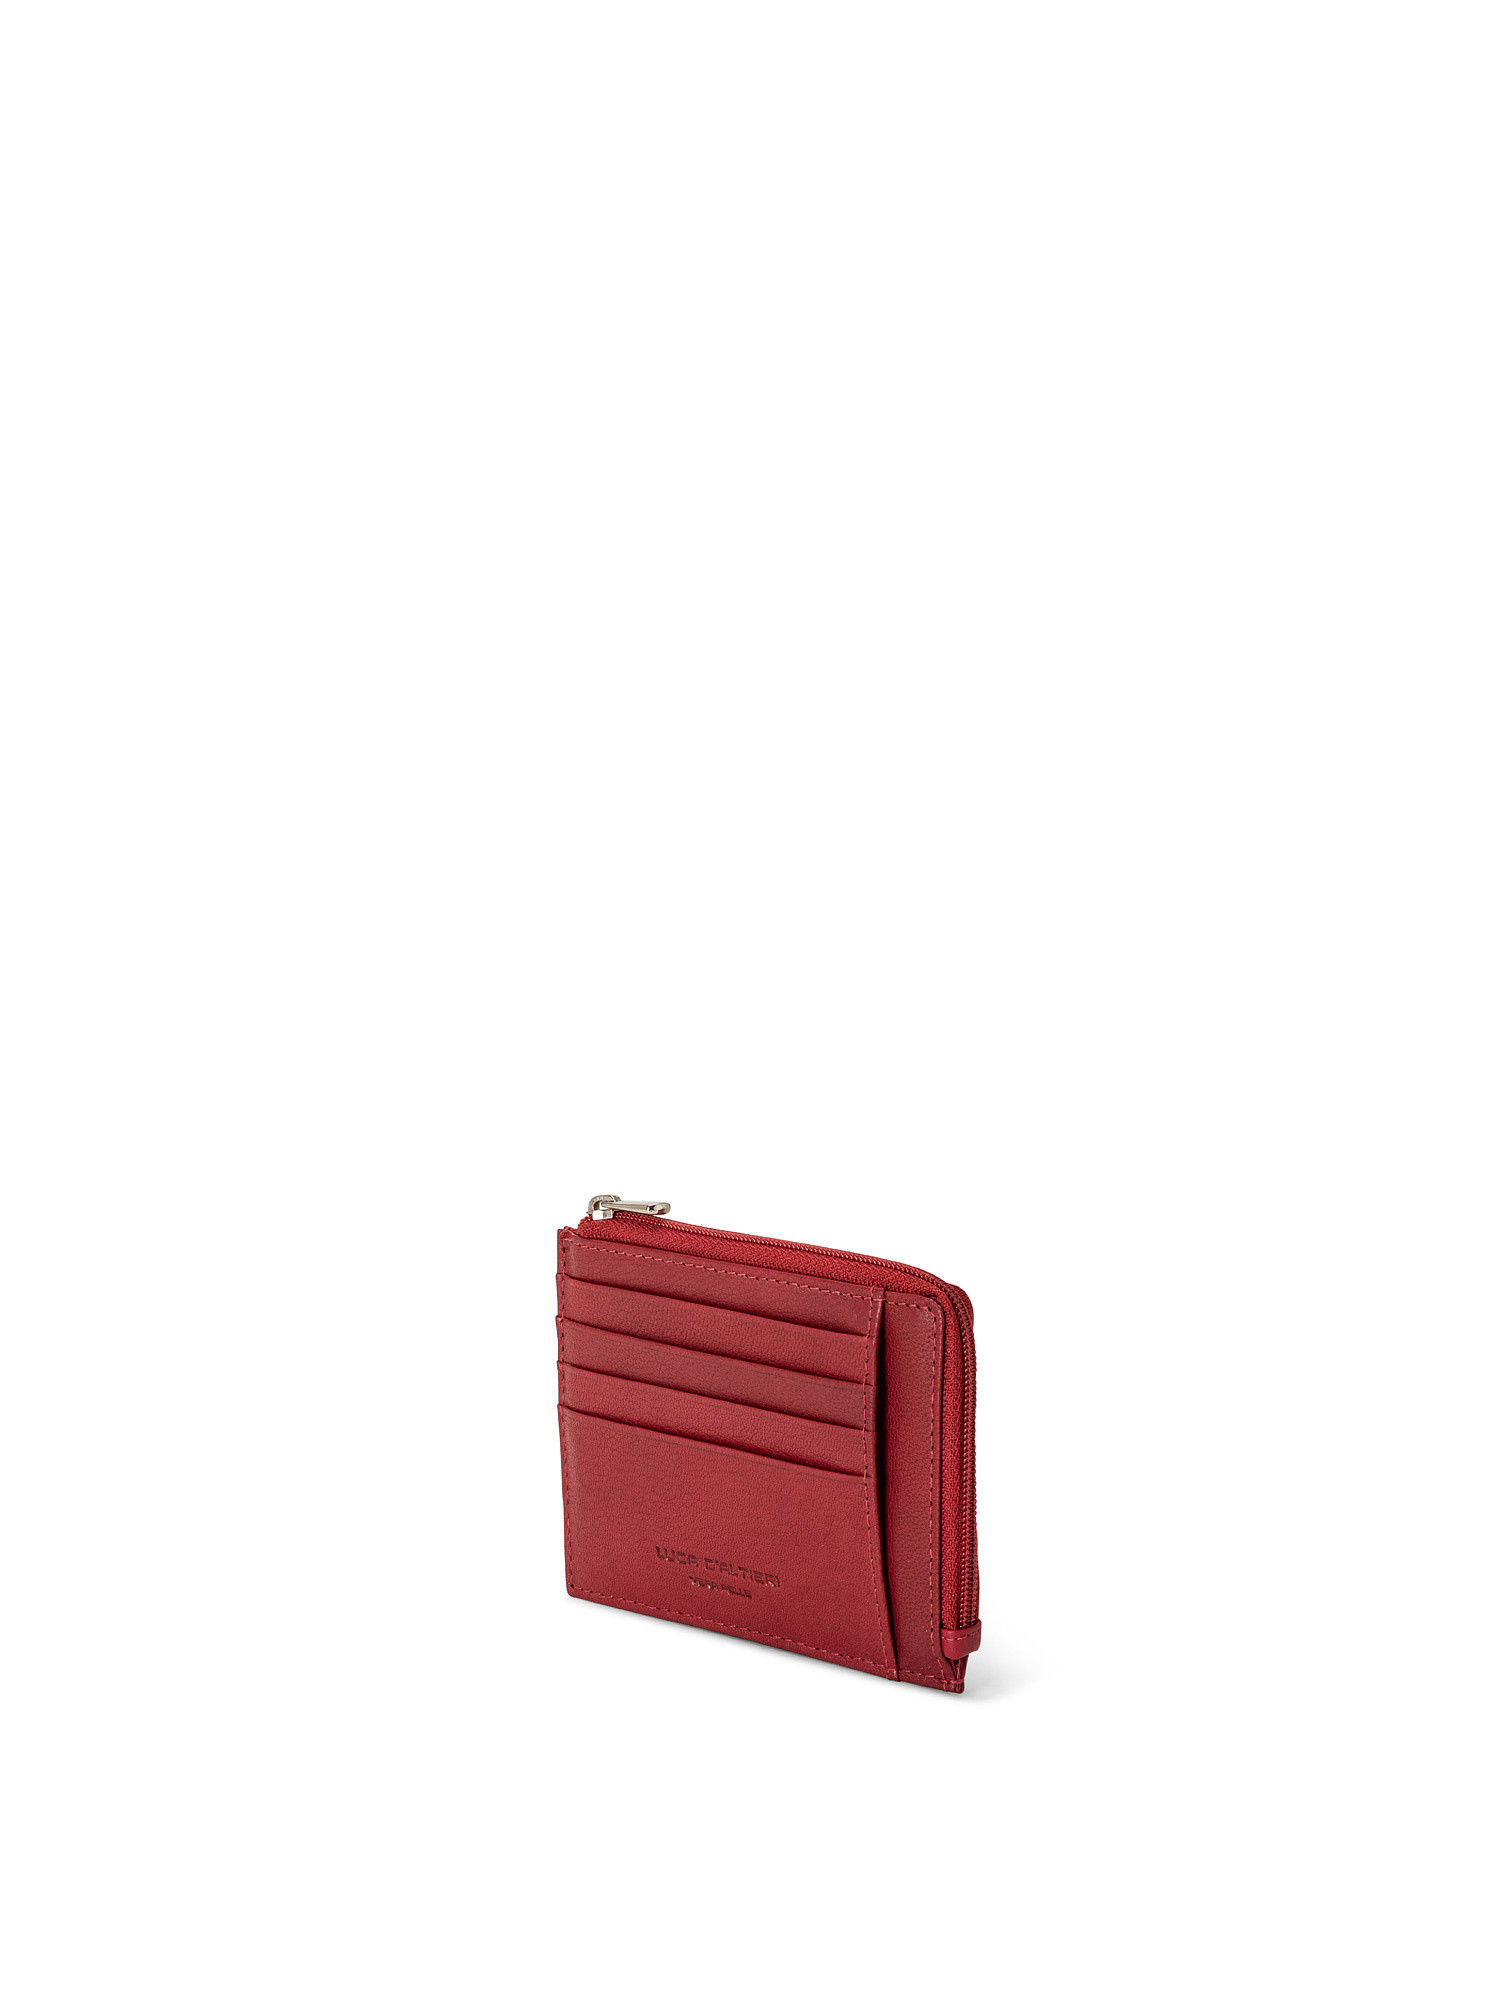 Small genuine leather wallet, Brick Red, large image number 2